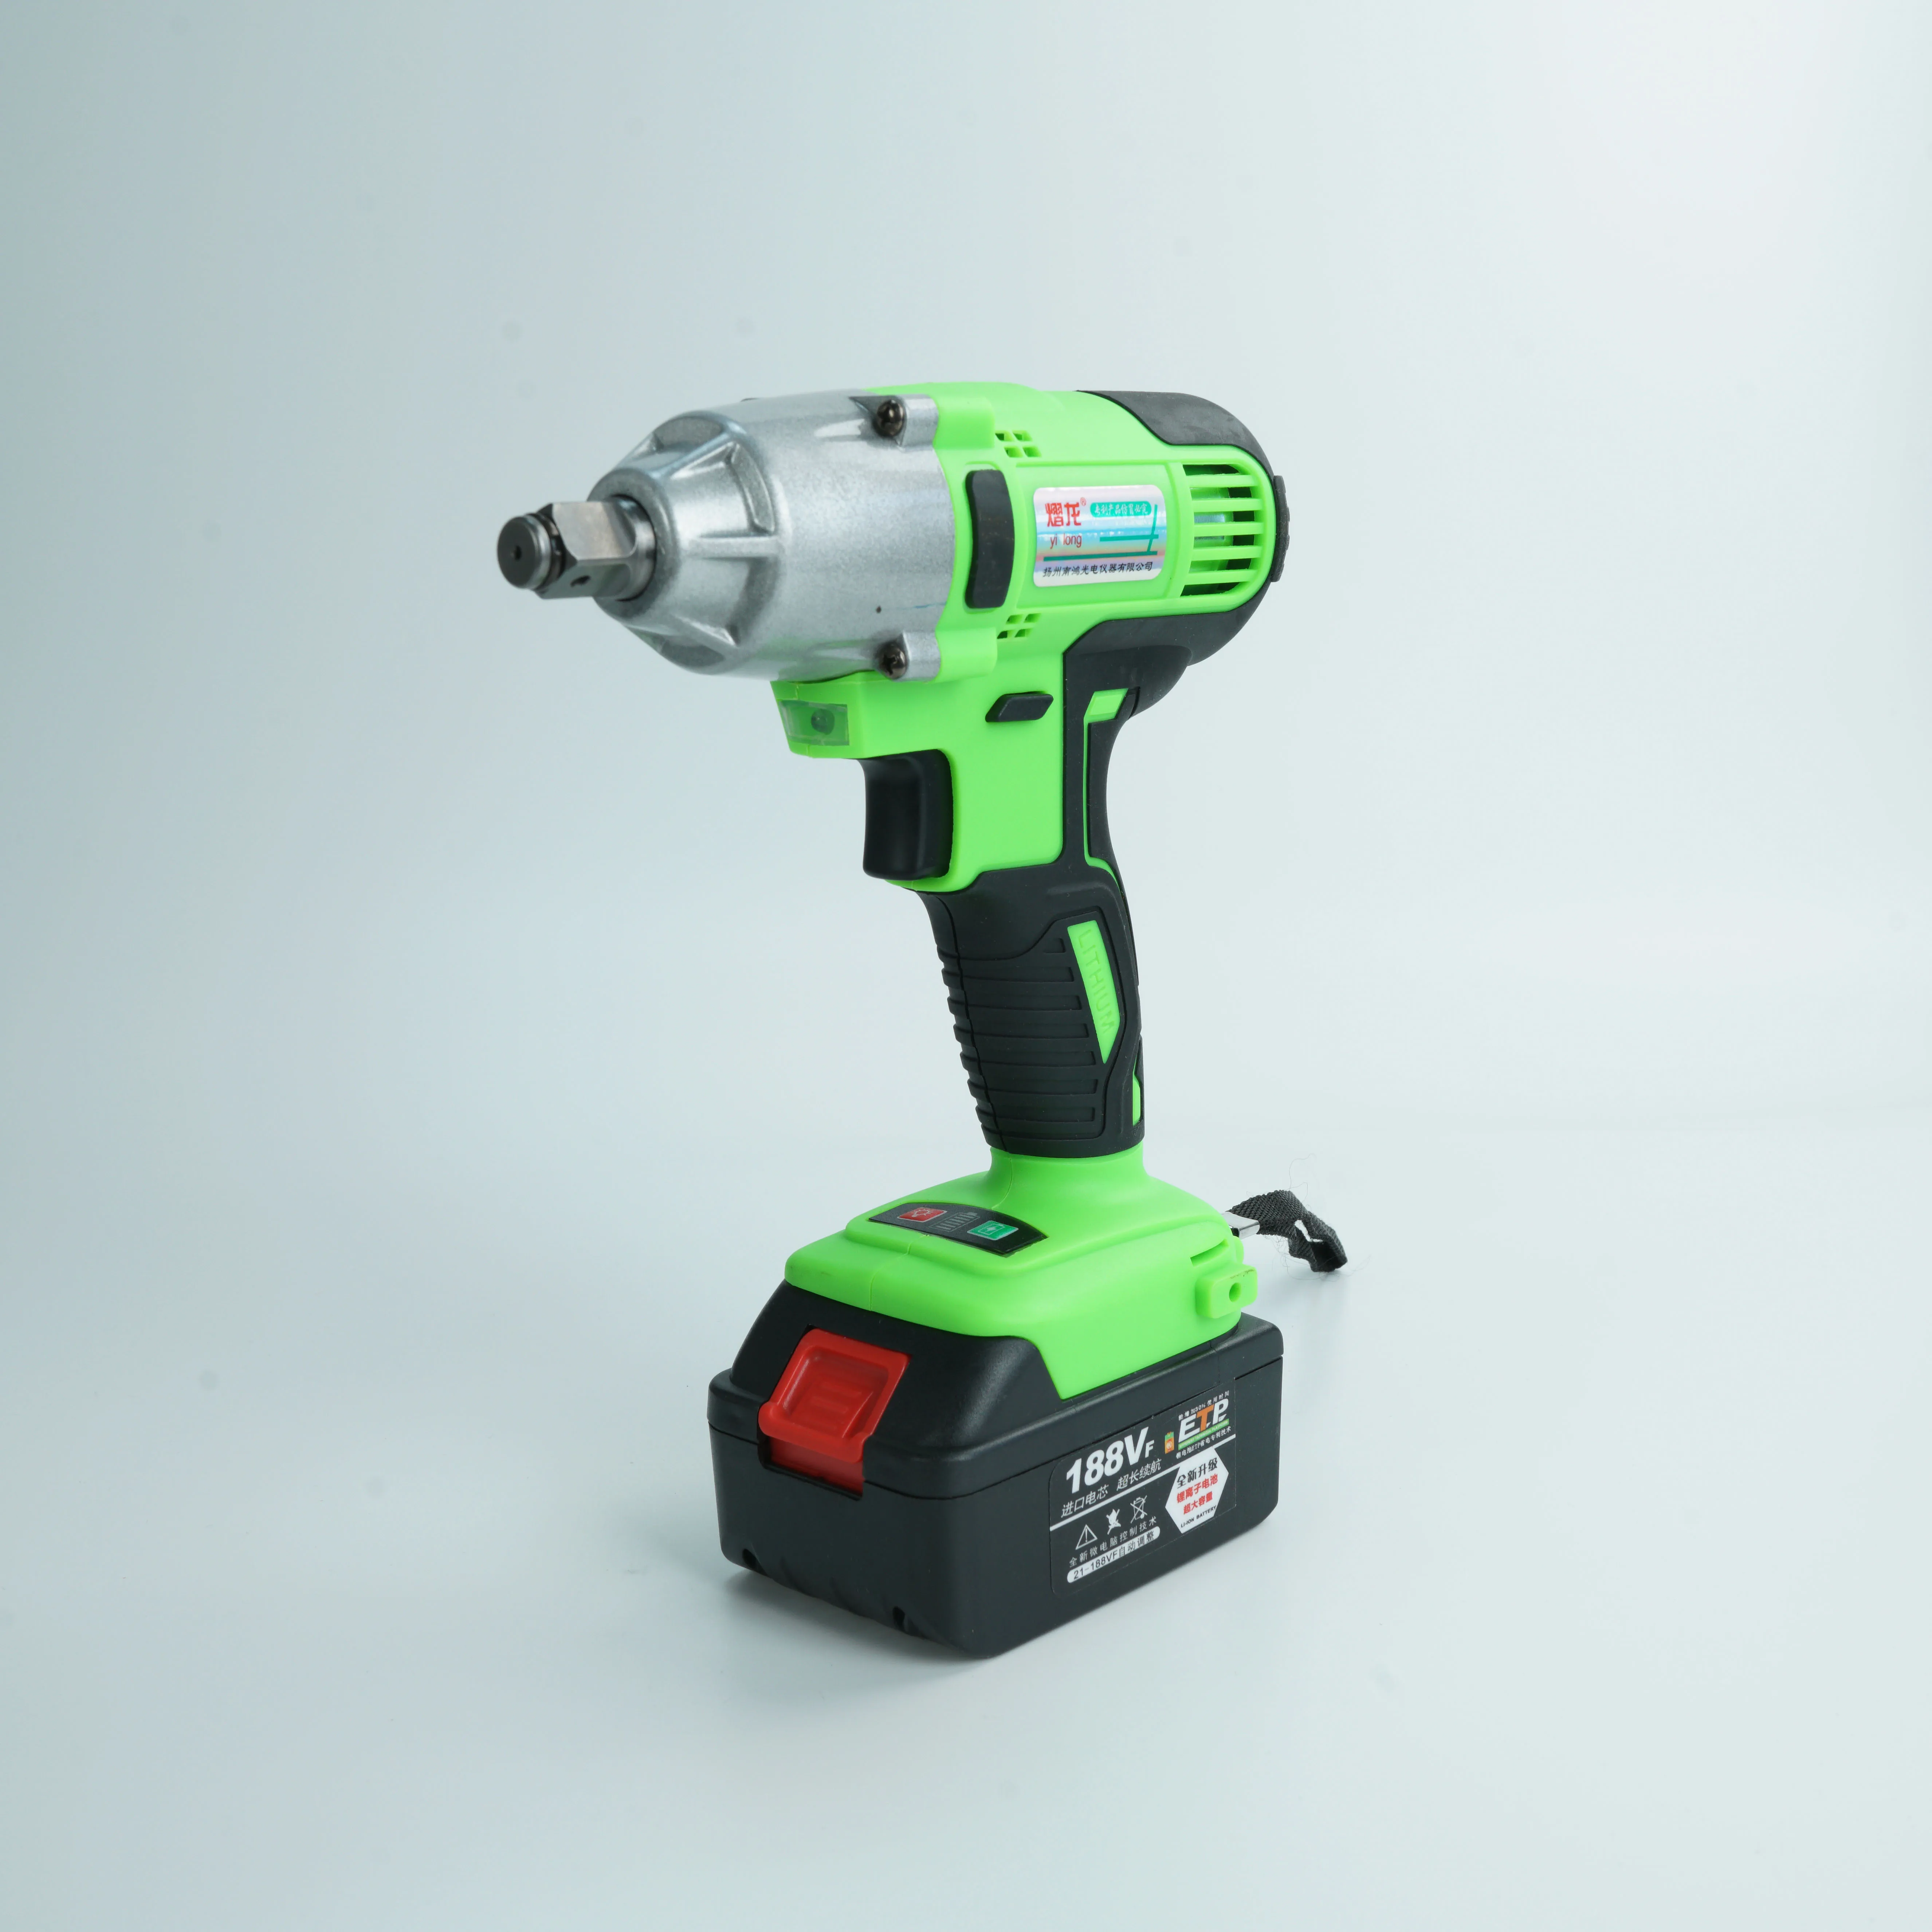 Nahom OEM Brushless Impact Wrench Cordless For Construction